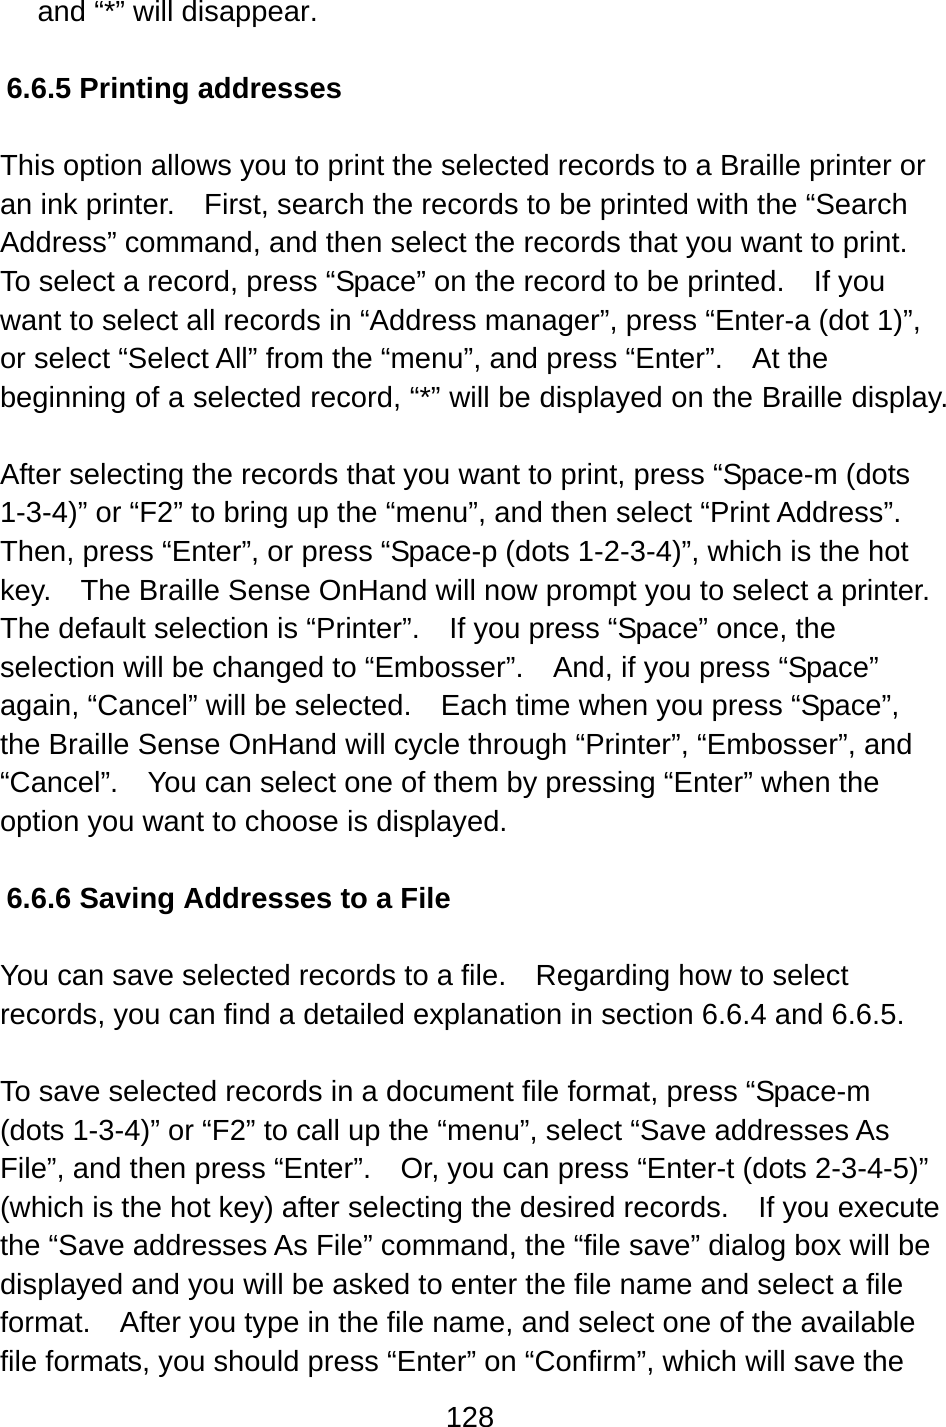 128  and “*” will disappear.  6.6.5 Printing addresses  This option allows you to print the selected records to a Braille printer or an ink printer.    First, search the records to be printed with the “Search Address” command, and then select the records that you want to print.   To select a record, press “Space” on the record to be printed.    If you want to select all records in “Address manager”, press “Enter-a (dot 1)”, or select “Select All” from the “menu”, and press “Enter”.    At the beginning of a selected record, “*” will be displayed on the Braille display.  After selecting the records that you want to print, press “Space-m (dots 1-3-4)” or “F2” to bring up the “menu”, and then select “Print Address”.   Then, press “Enter”, or press “Space-p (dots 1-2-3-4)”, which is the hot key.    The Braille Sense OnHand will now prompt you to select a printer.   The default selection is “Printer”.    If you press “Space” once, the selection will be changed to “Embosser”.    And, if you press “Space” again, “Cancel” will be selected.    Each time when you press “Space”, the Braille Sense OnHand will cycle through “Printer”, “Embosser”, and “Cancel”.    You can select one of them by pressing “Enter” when the option you want to choose is displayed.  6.6.6 Saving Addresses to a File  You can save selected records to a file.    Regarding how to select records, you can find a detailed explanation in section 6.6.4 and 6.6.5.  To save selected records in a document file format, press “Space-m (dots 1-3-4)” or “F2” to call up the “menu”, select “Save addresses As File”, and then press “Enter”.    Or, you can press “Enter-t (dots 2-3-4-5)” (which is the hot key) after selecting the desired records.    If you execute the “Save addresses As File” command, the “file save” dialog box will be displayed and you will be asked to enter the file name and select a file format.    After you type in the file name, and select one of the available file formats, you should press “Enter” on “Confirm”, which will save the 